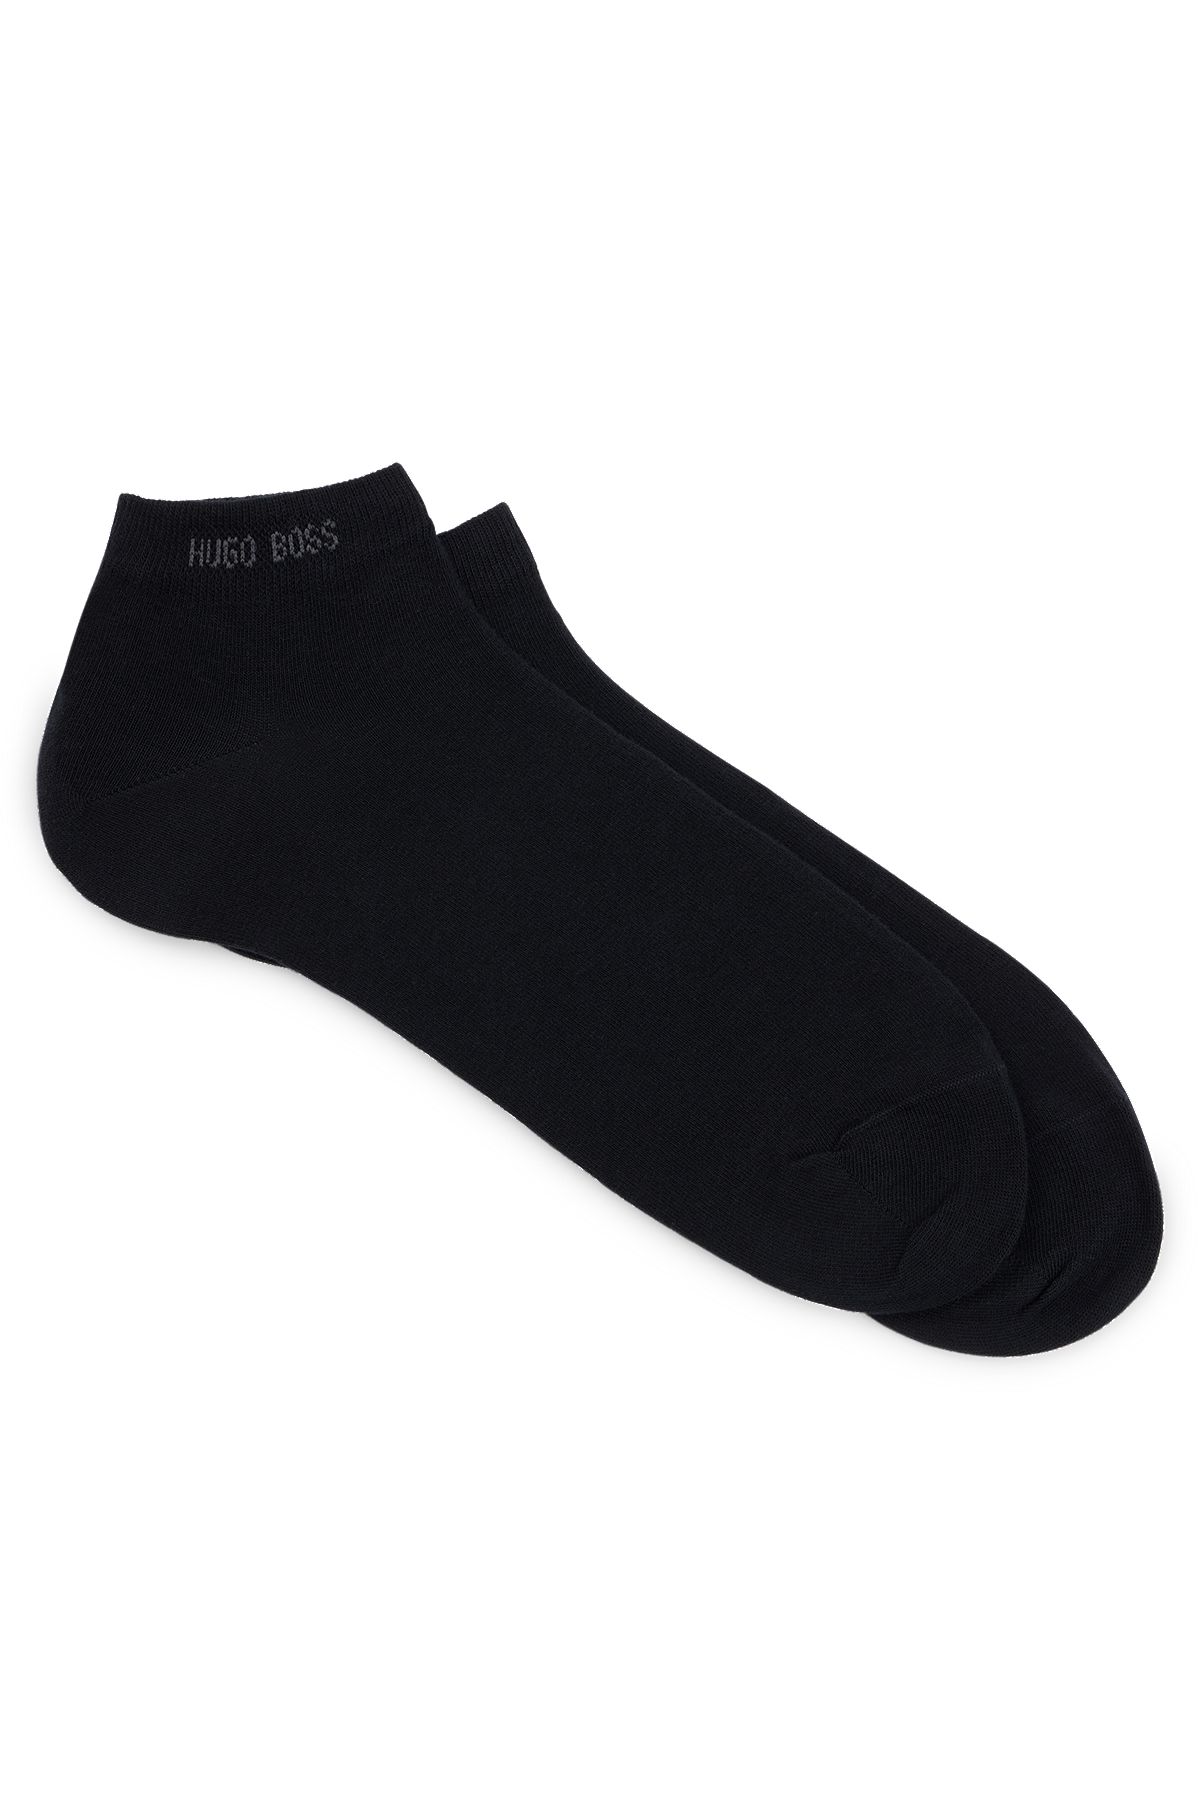 Two-pack of ankle-length socks in a cotton blend, Black